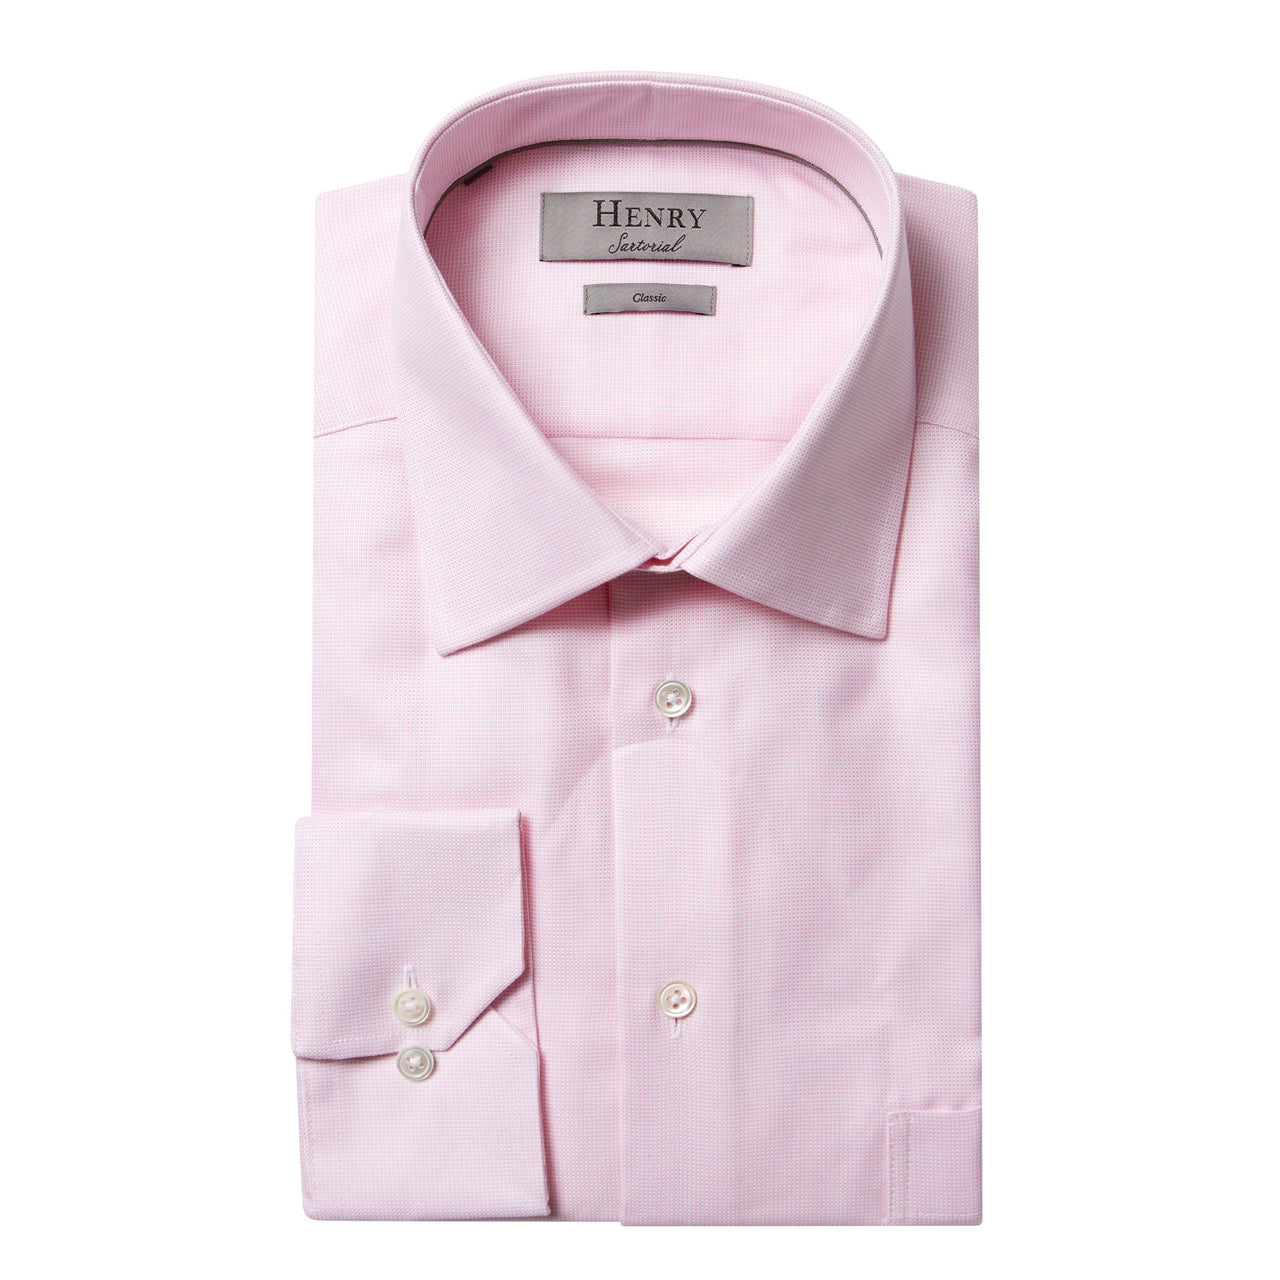 HENRY SARTORIAL Oxford Business Shirt Single Cuff Classic Fit PINK/WHITE